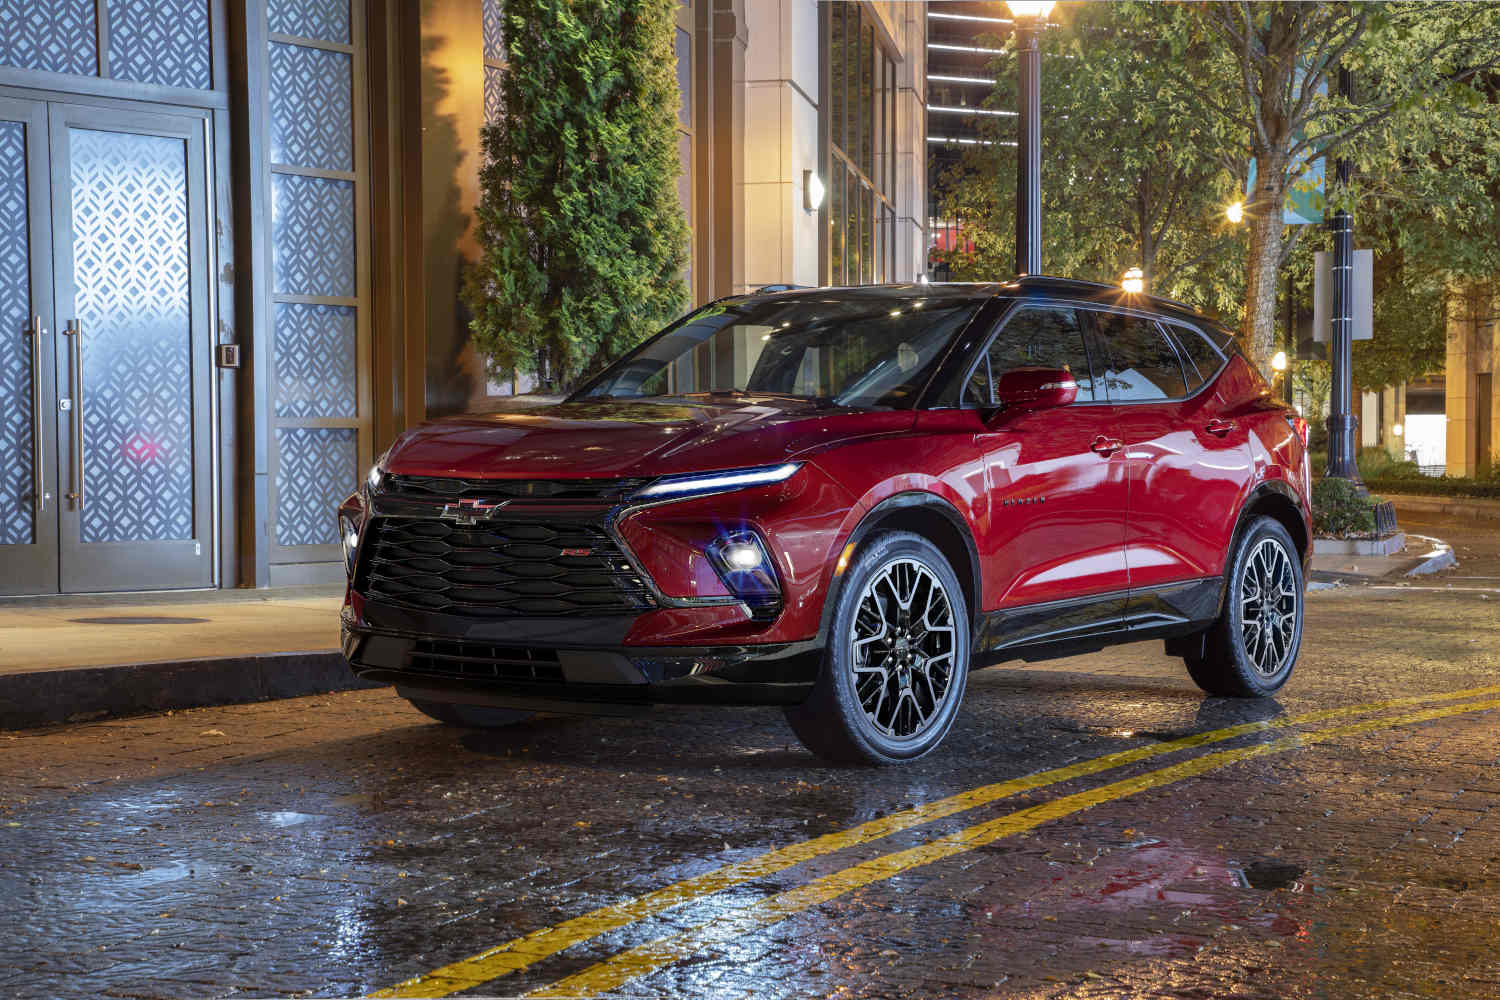 This 2023 Chevrolet Blazer is a midsize SUV